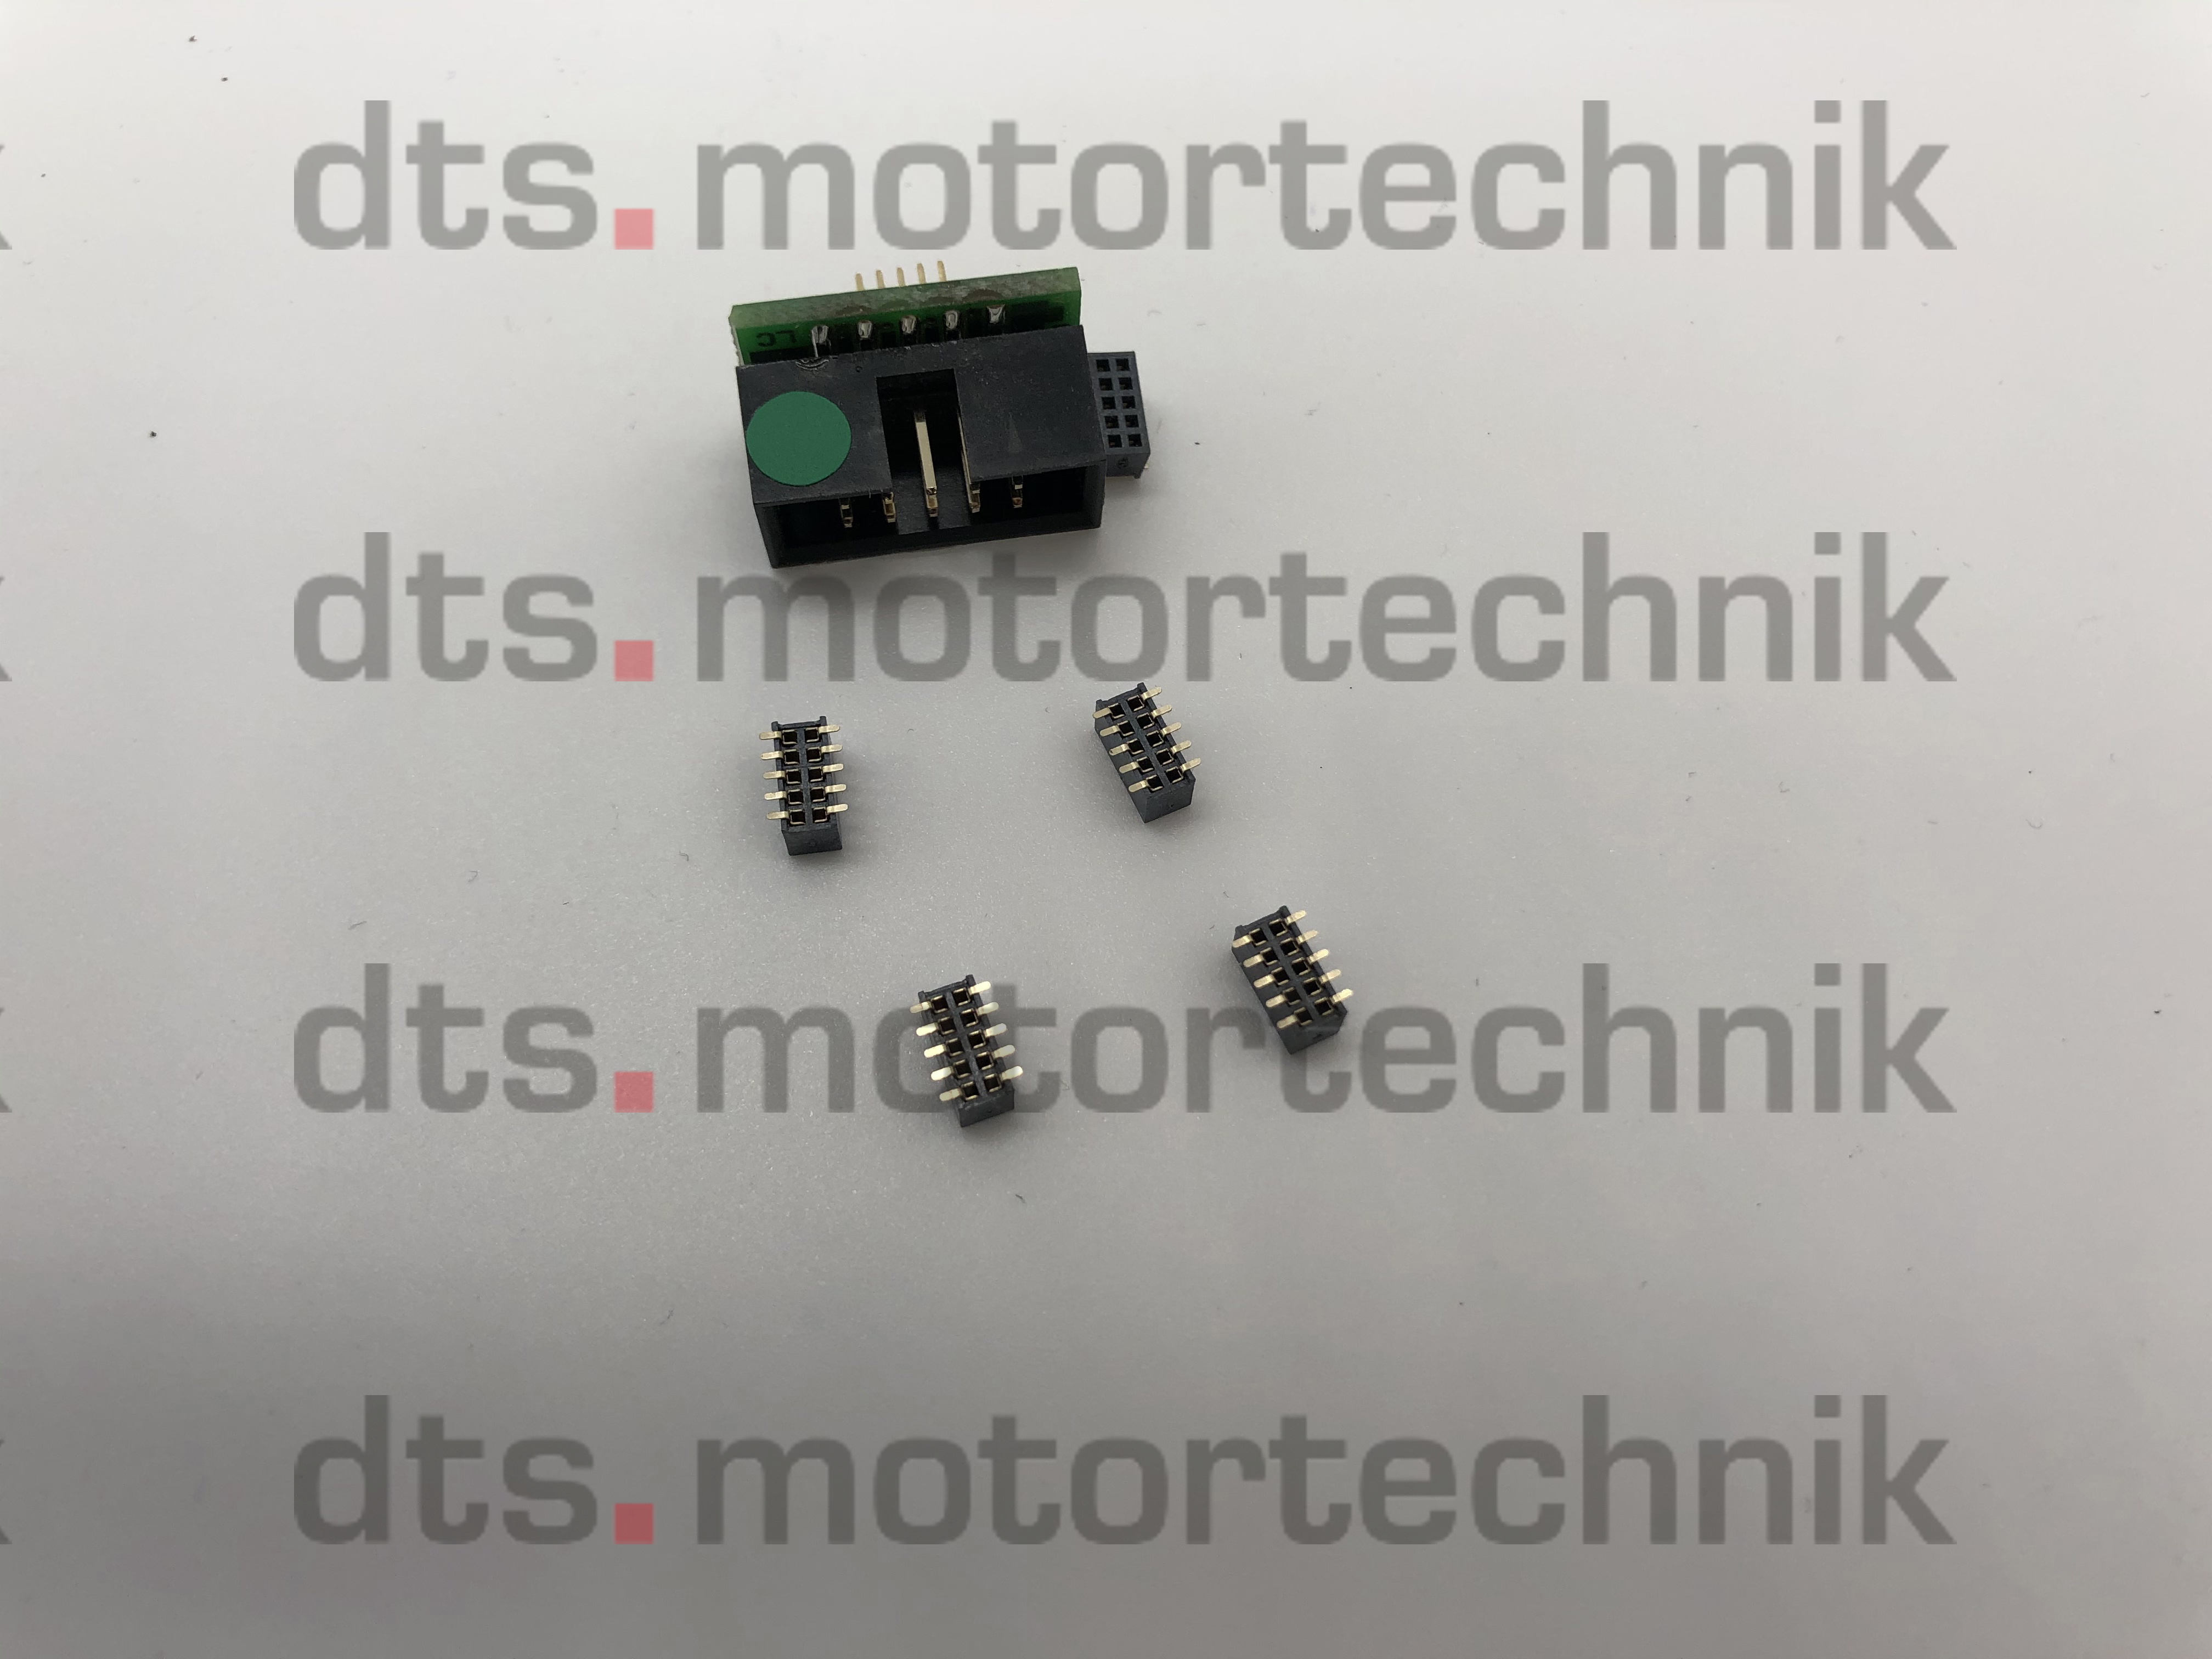 EFI ECUs (Motorola MPC56X) - Board/wires for soldered connections